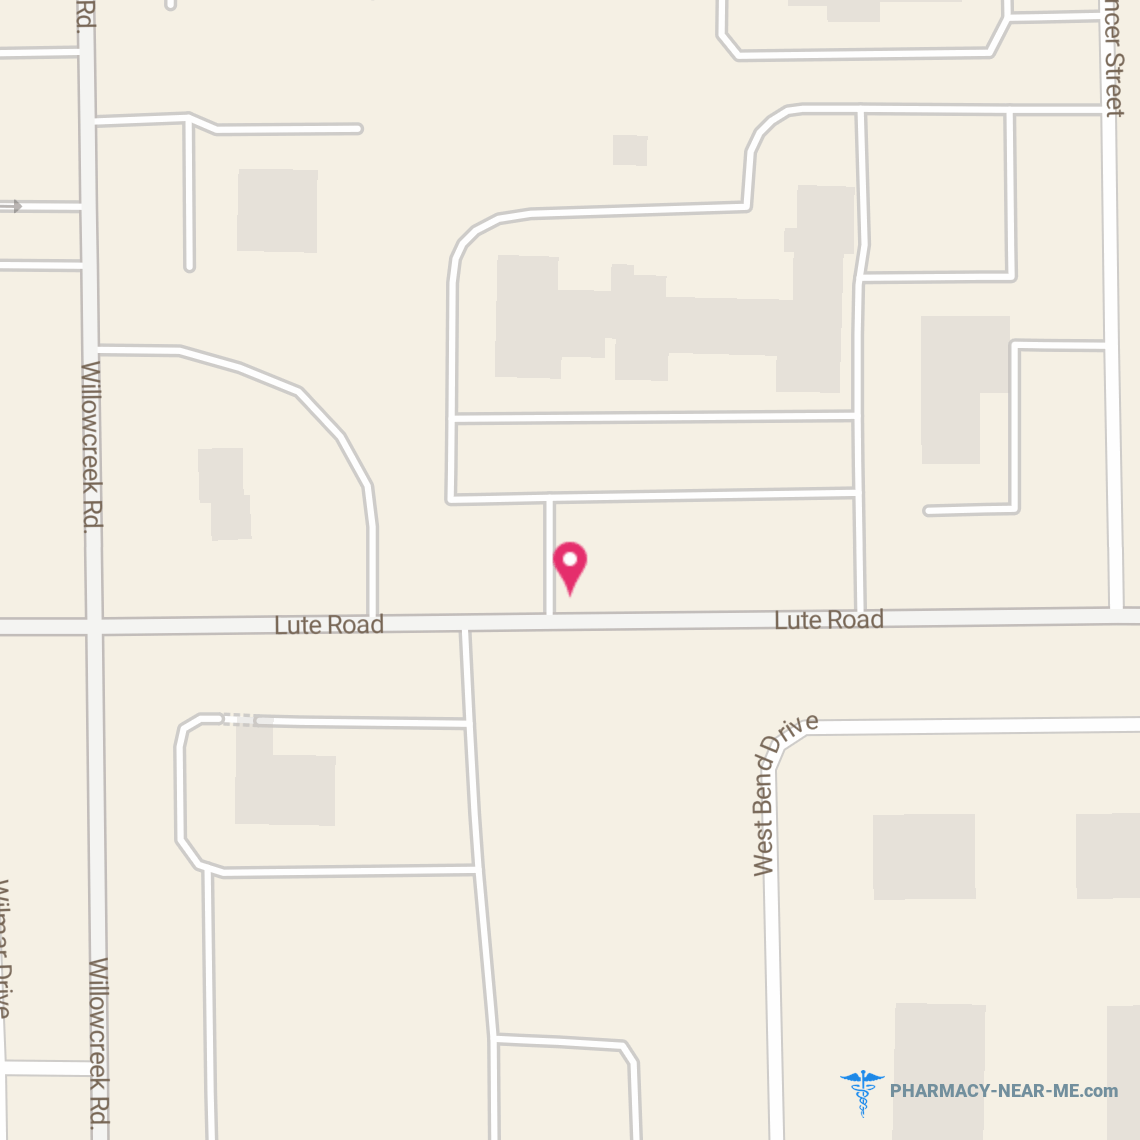 PHARMA-CARD PORTAGE - Pharmacy Hours, Phone, Reviews & Information: 6036 Lute Road, Portage, Indiana 46368, United States